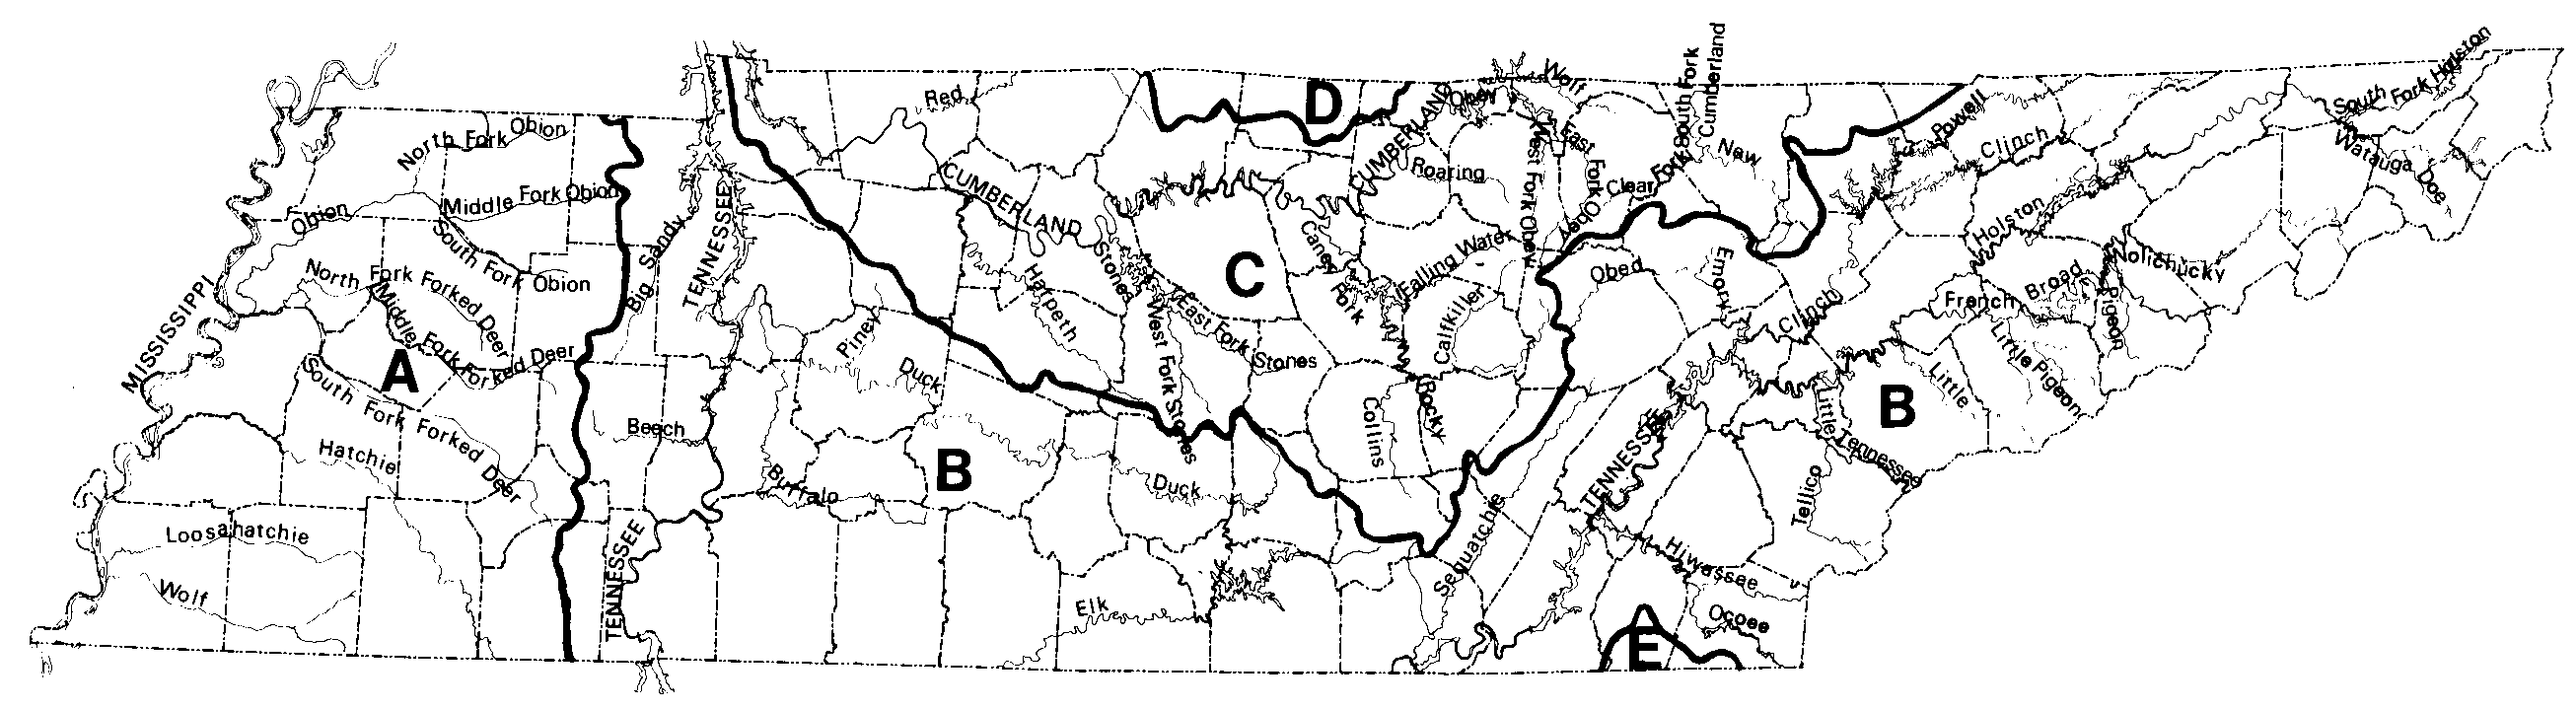 Figure 3: Rivers and Major Drainage Systems